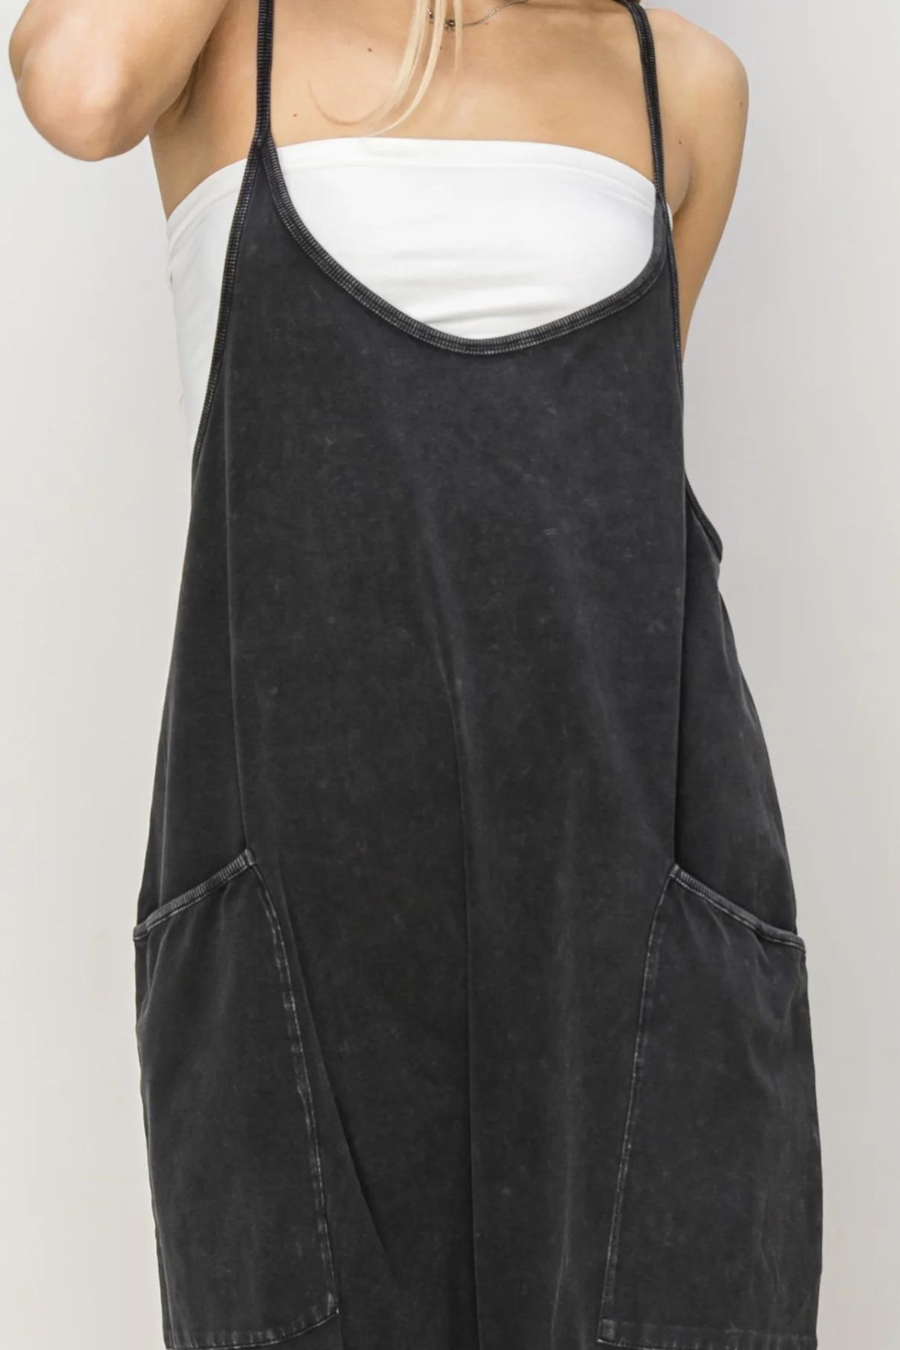 close up front shot of franny romper in black, girl is wearing a white cami underneath it 